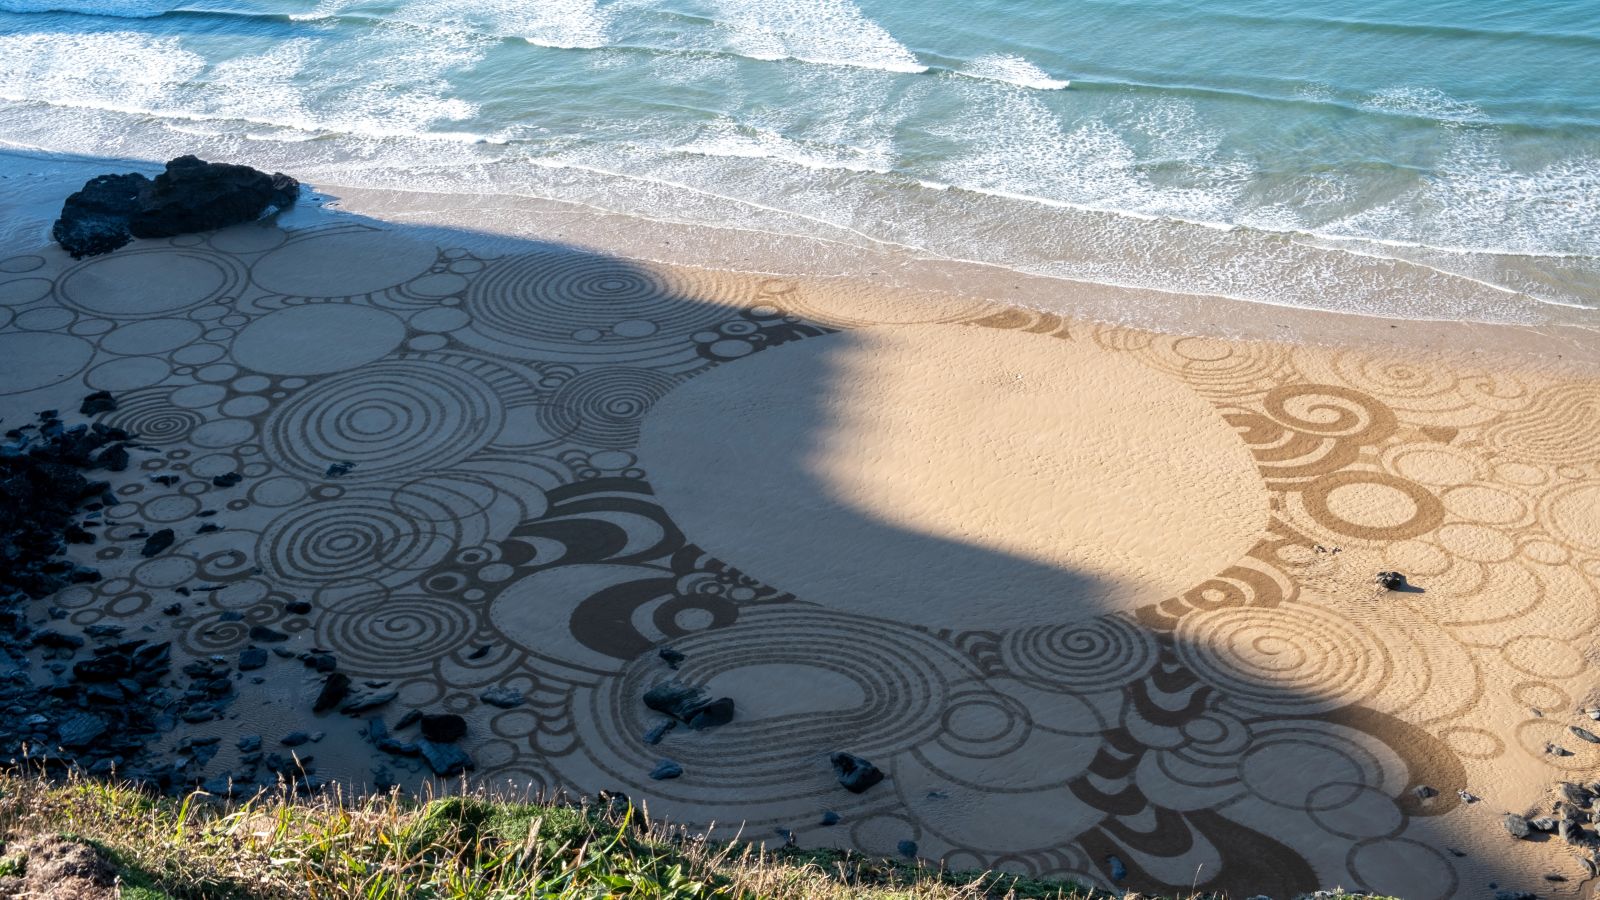 Falmouth students create stunning sand drawing on beach near Newquay ...